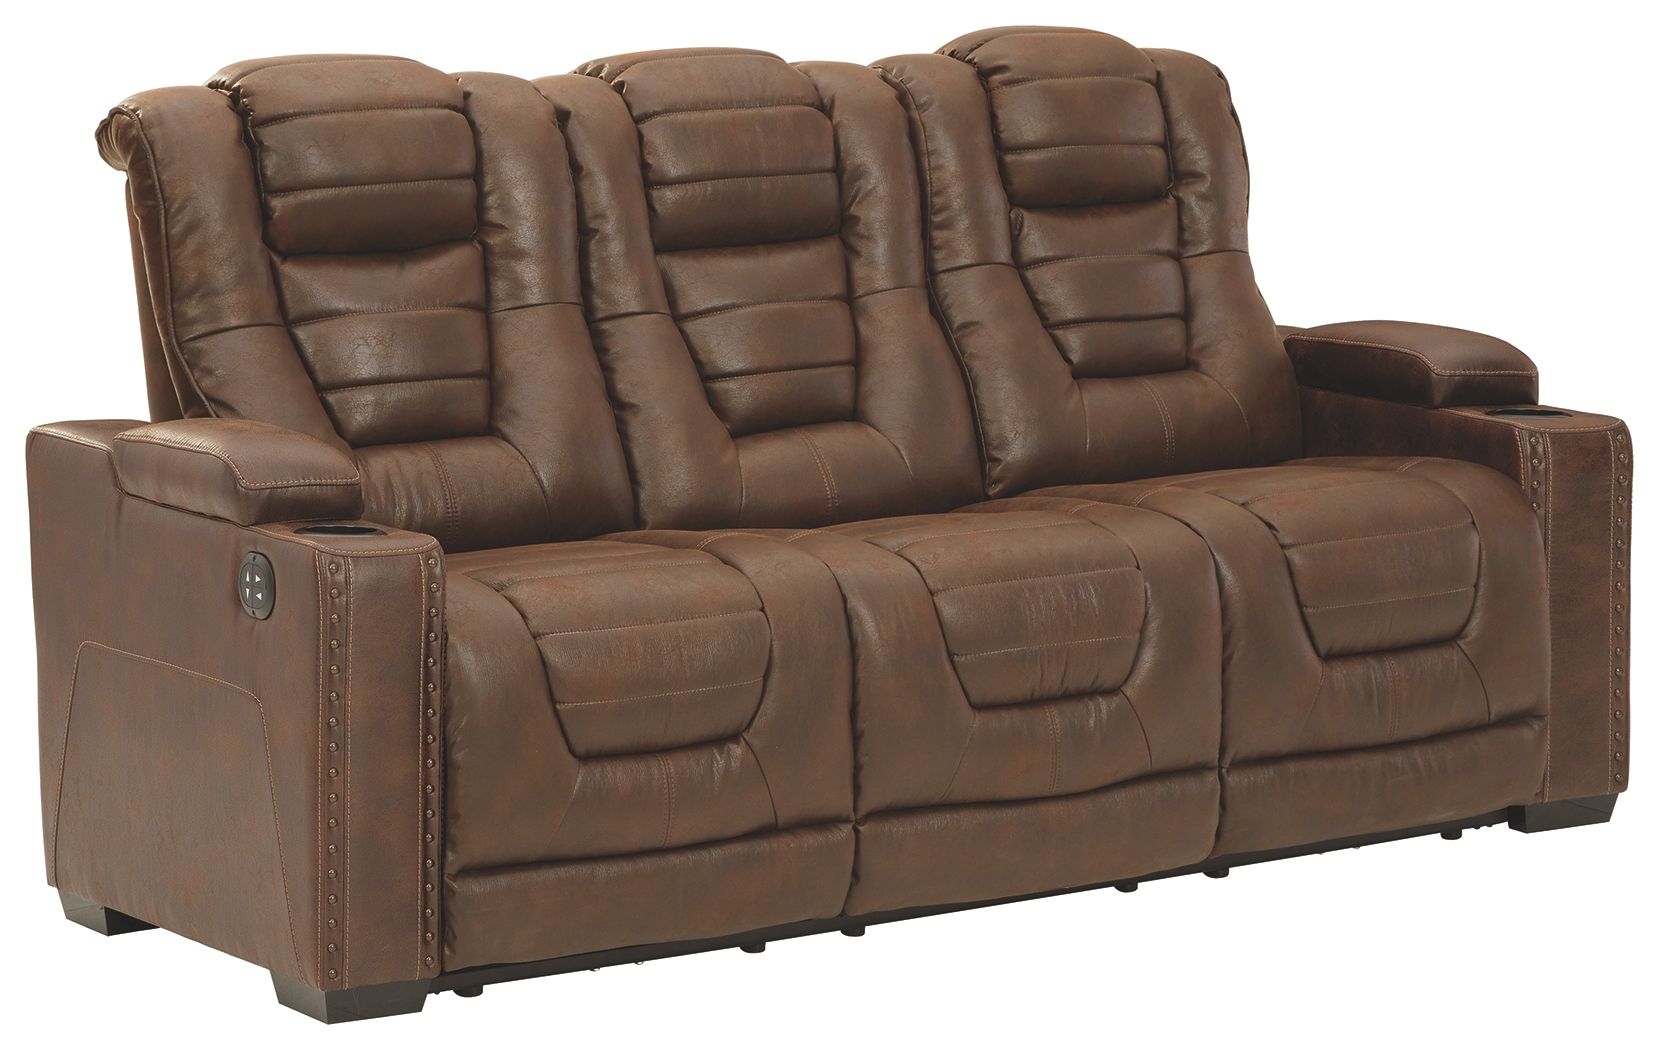 Signature Design by Ashley Owner's Box Thyme Power Reclining Sofa, Brown Faux Leather, Adjustable Headrest